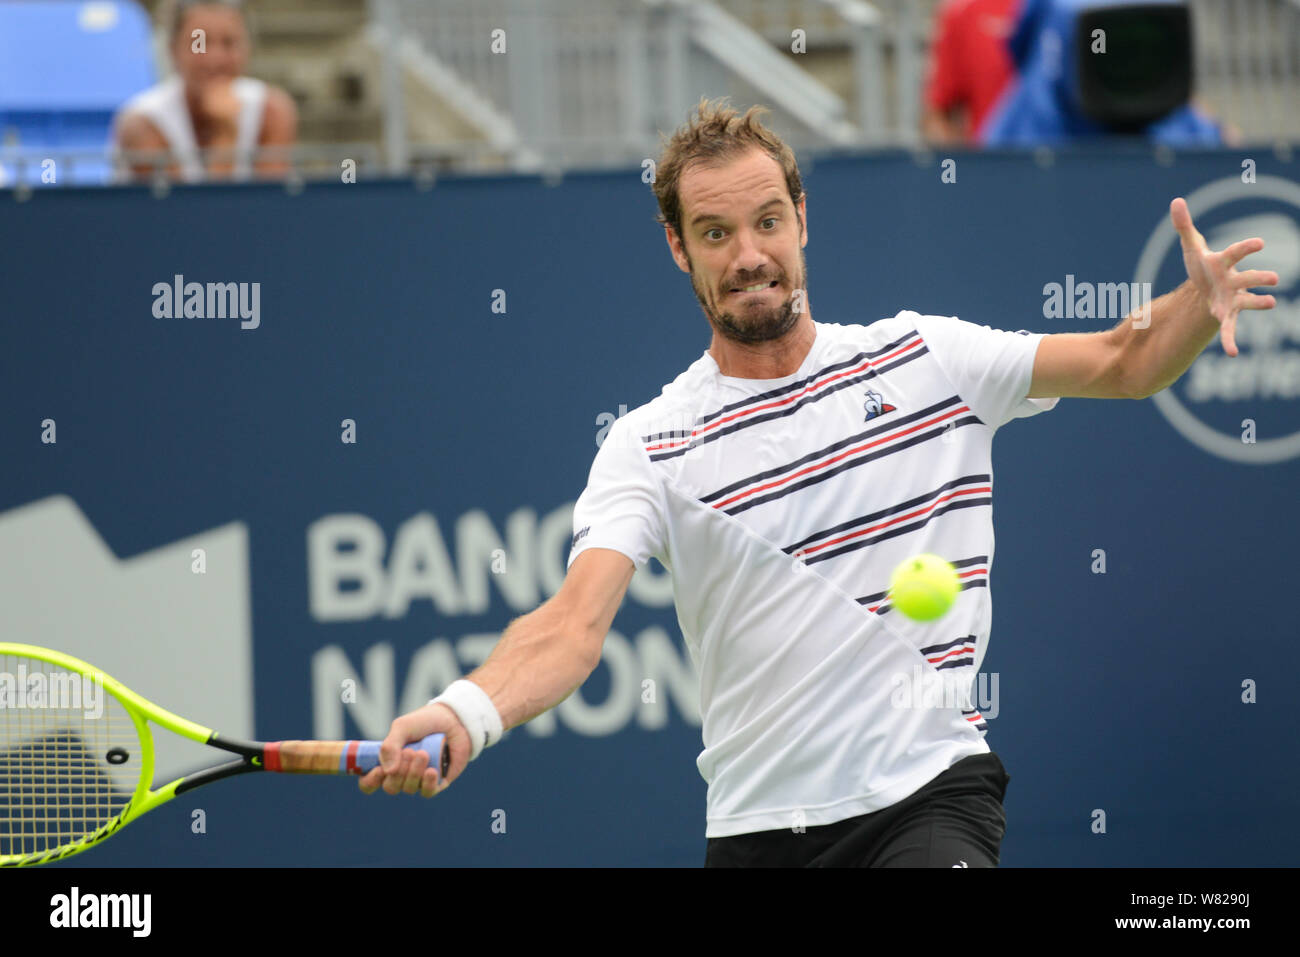 Montreal, Quebec, Canada. 7th Aug, 2019. RICHARD GASQUET of France in his second round match v. K